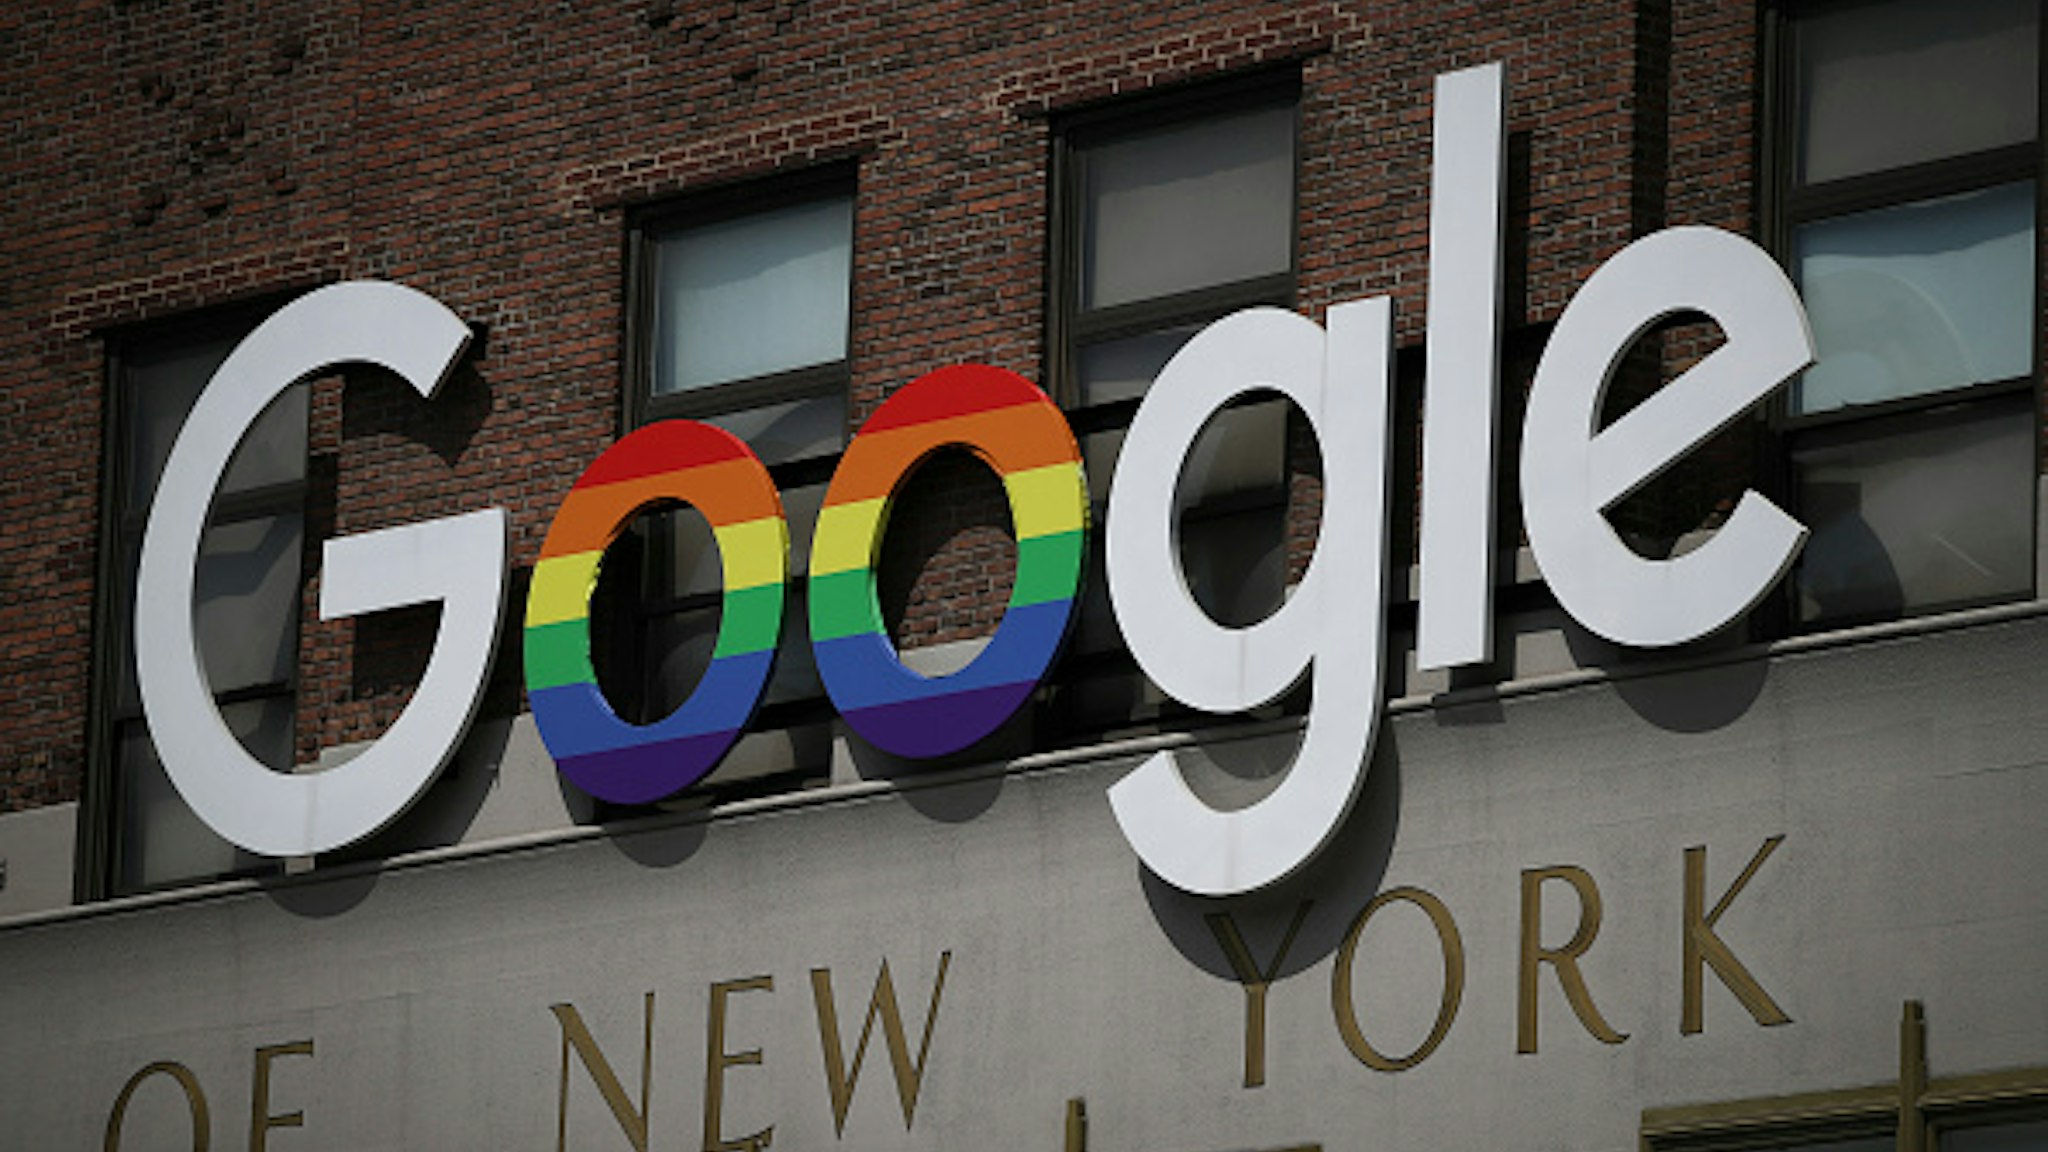 The Google logo adorns the outside of their NYC office Google Building 8510 at 85 10th Ave on June 3, 2019 in New York City.